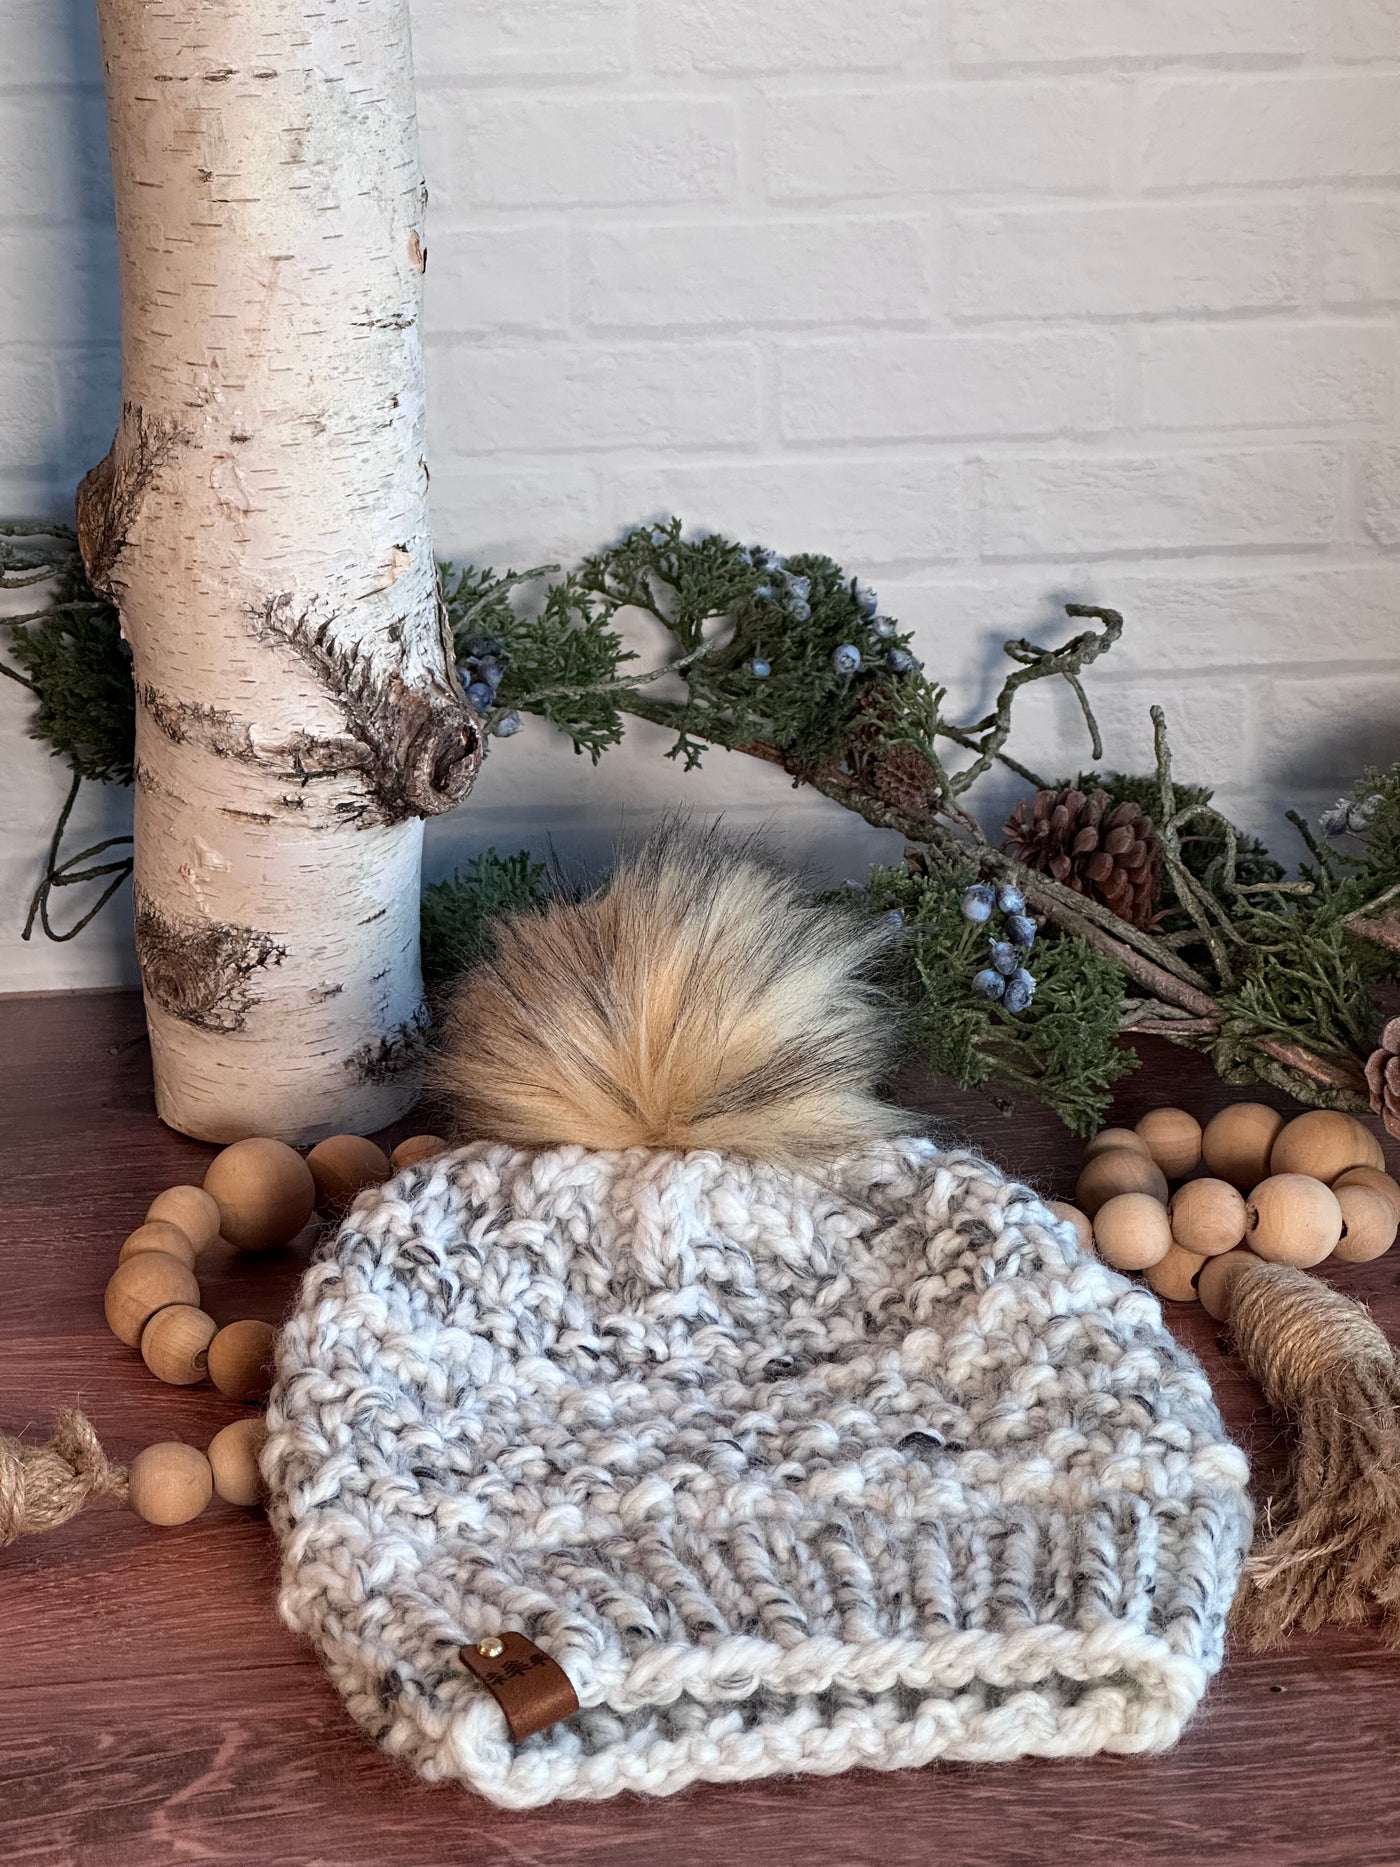 chunky handmade knit hat in charcoal and white colored yarn and a brown faux fur Pom Pom